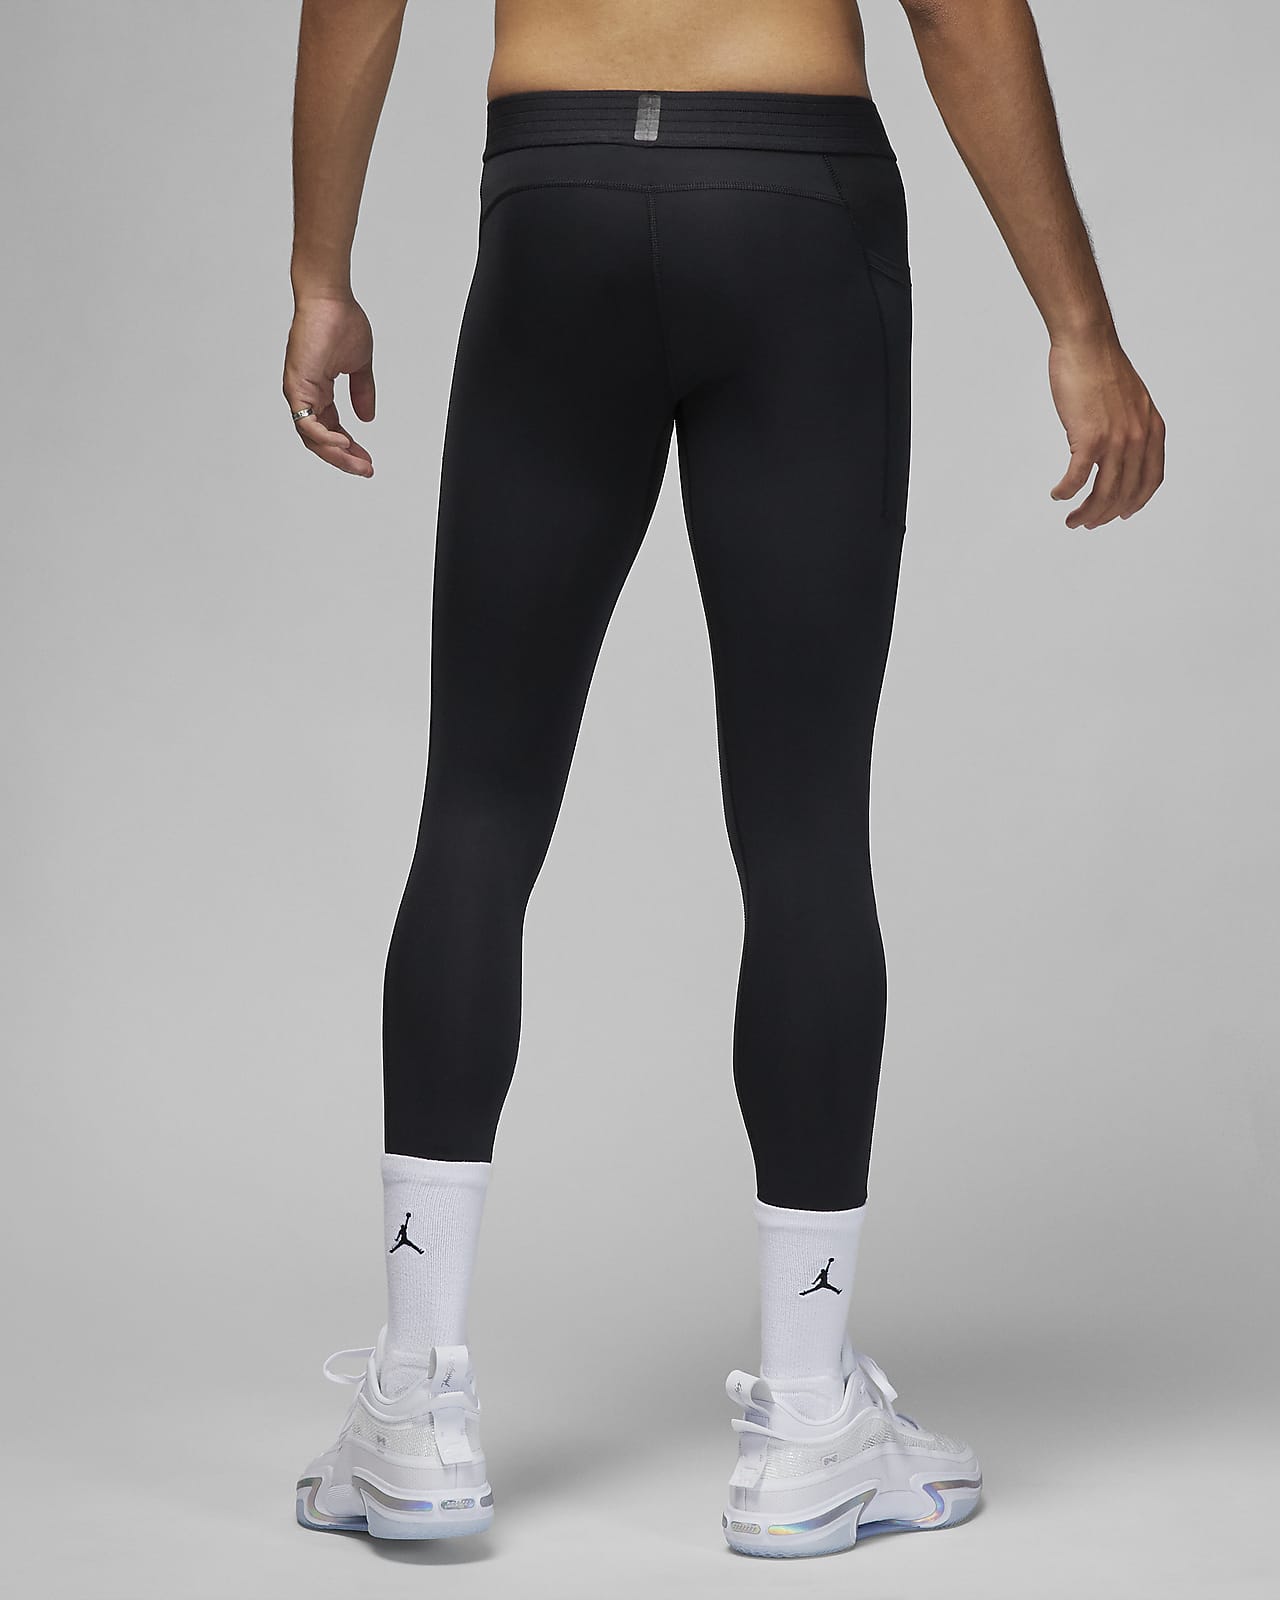  Nike Pro Dry 3/4 Basketball Tights Black/Black SM : Clothing,  Shoes & Jewelry